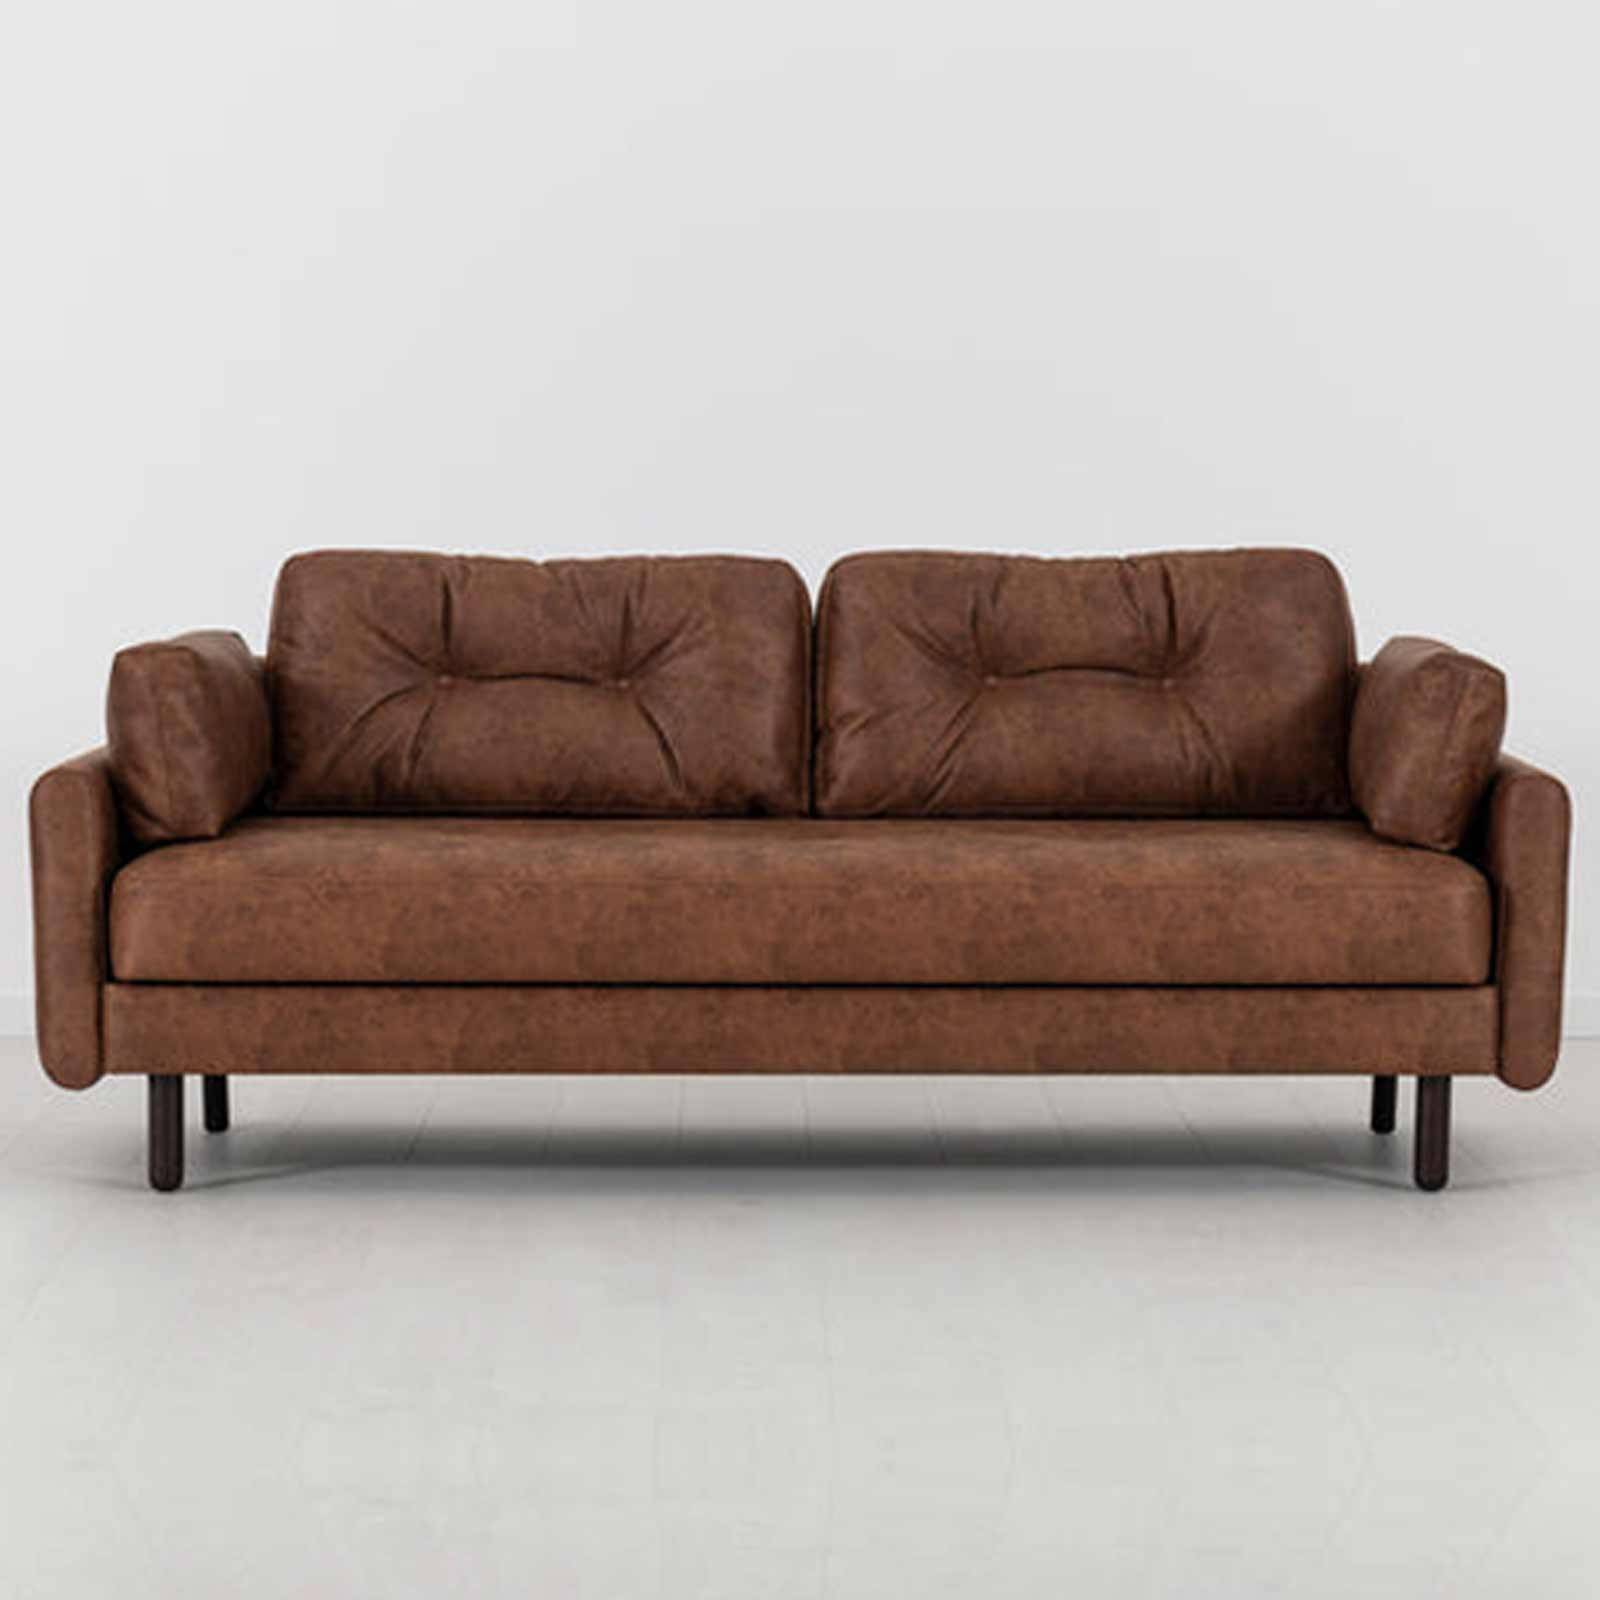 Swyft Model 04 - 3 Seater Sofa Bed - Faux Leather Chestnut